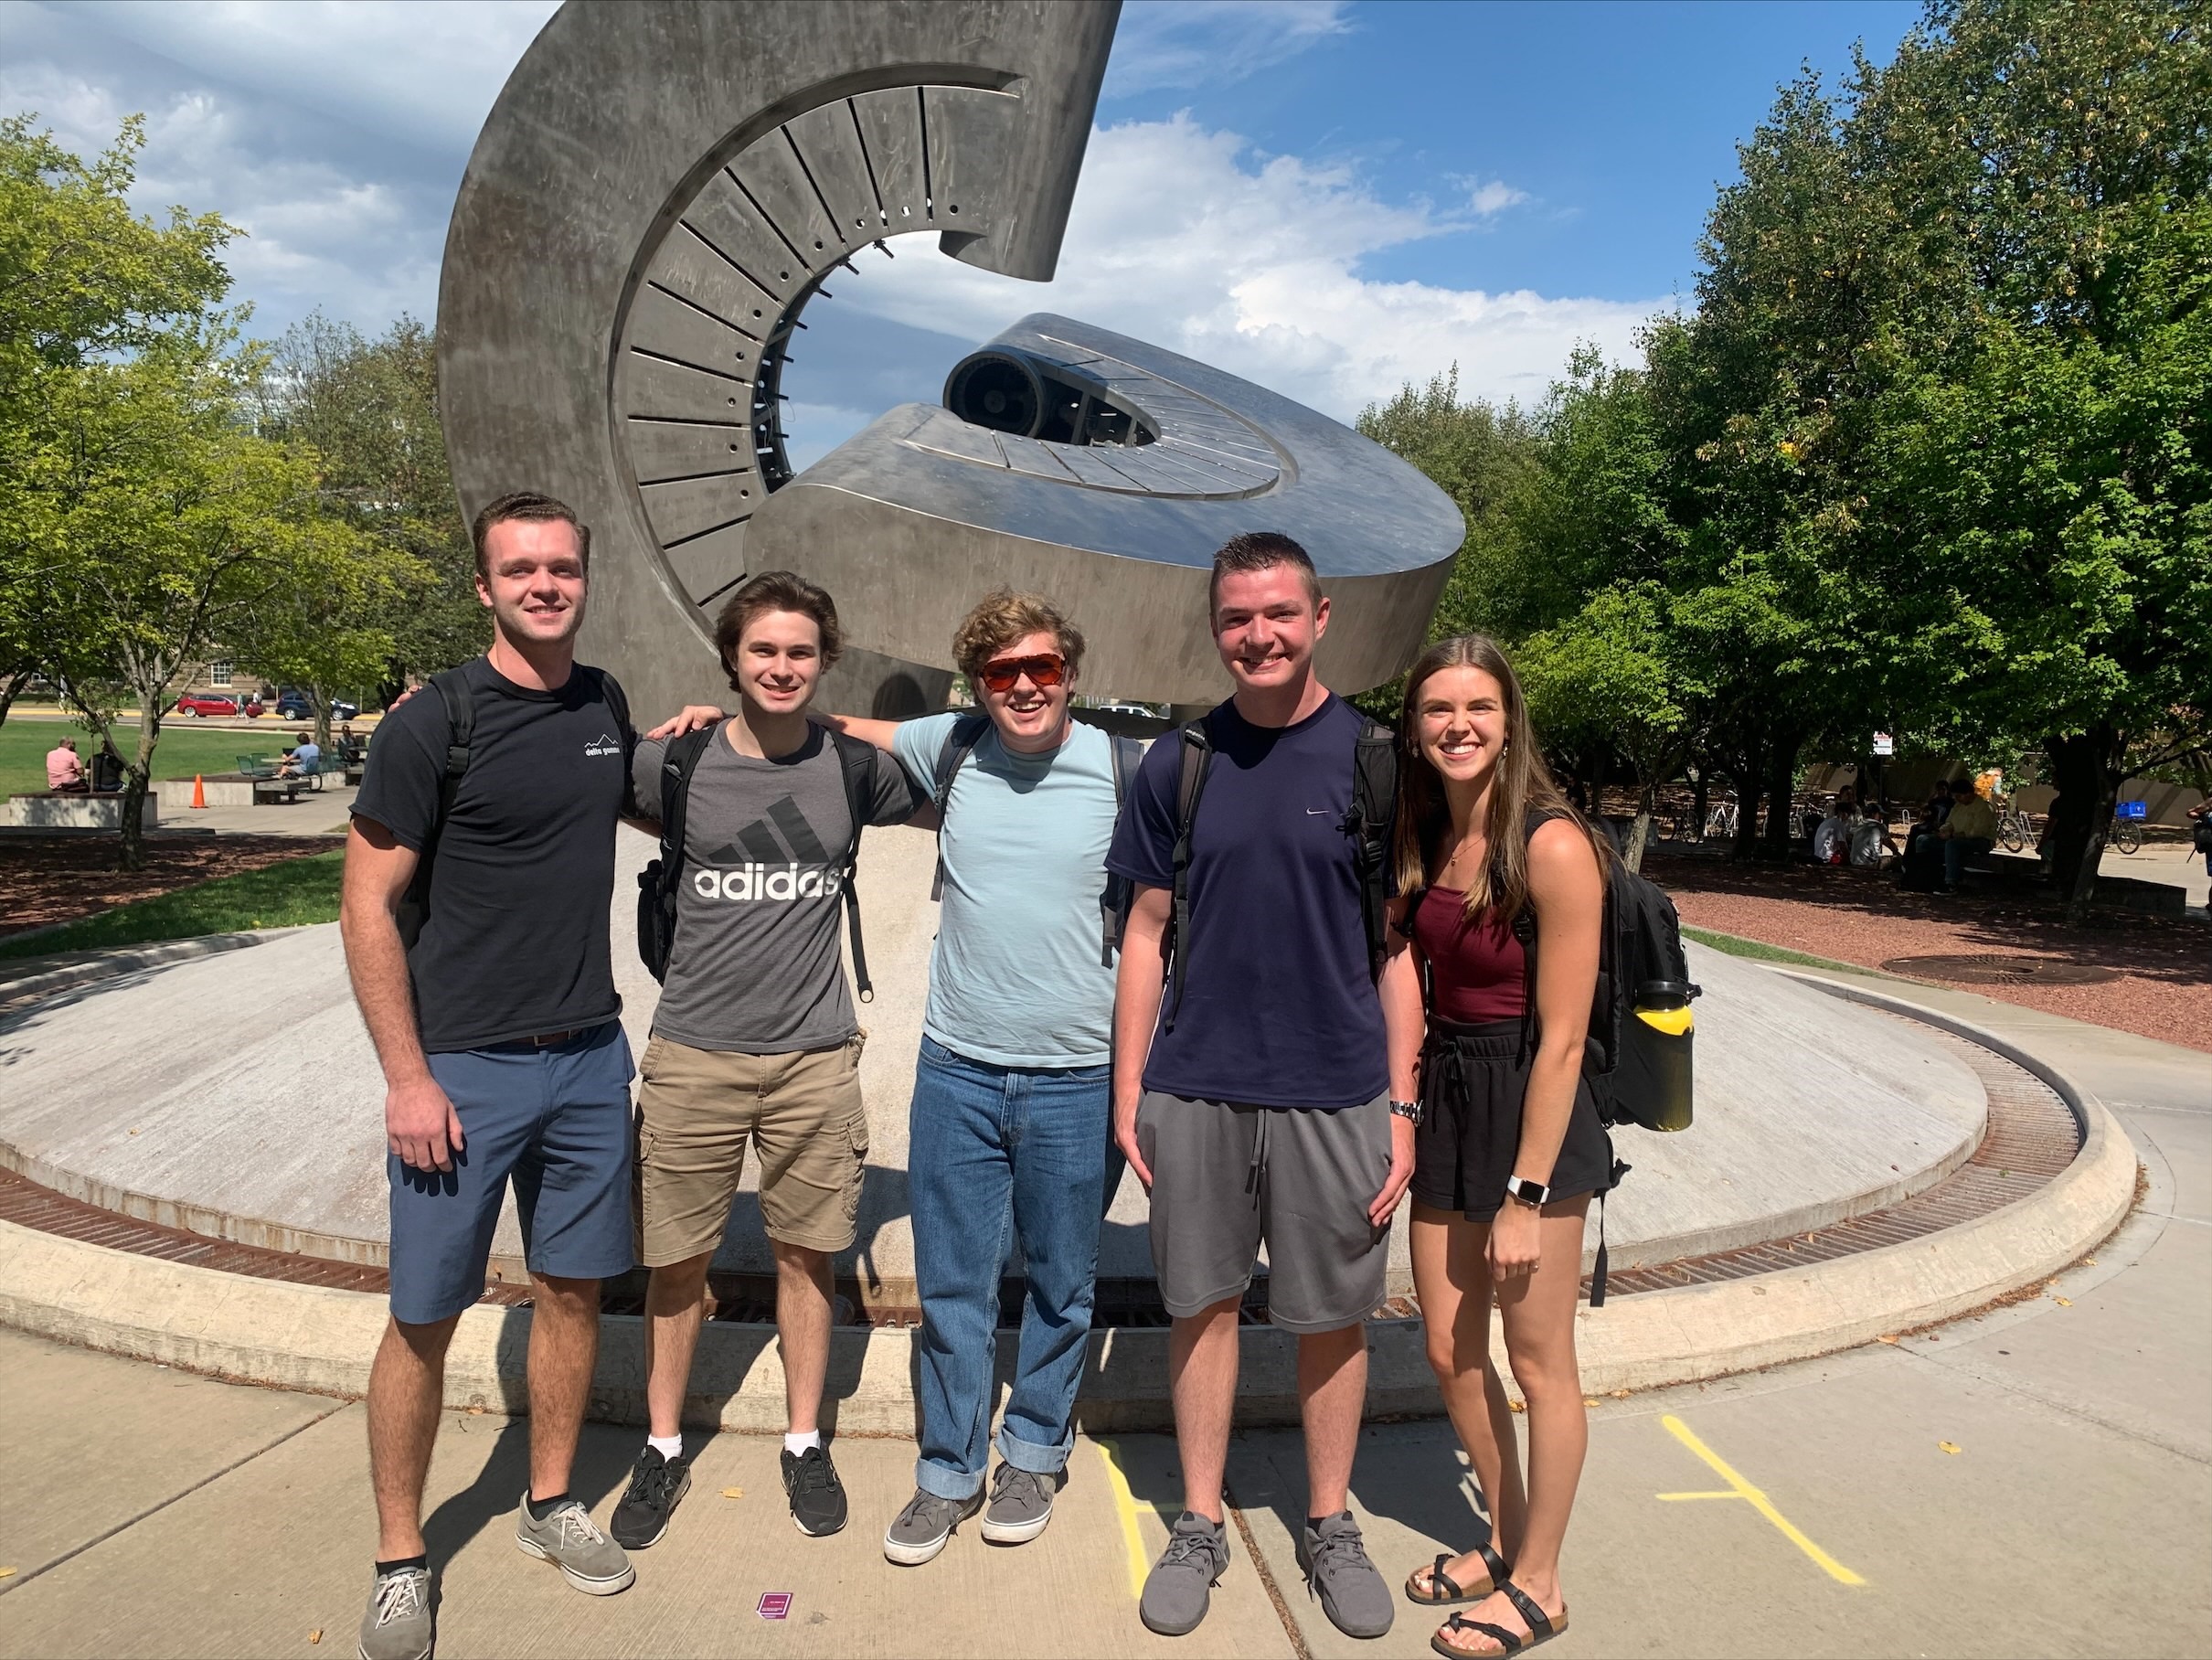 Meet the project team (left to right): Matthew Voigt, Jonathan Izban, Christopher Wiegand, Max Christopherson, and Sydney Heimer